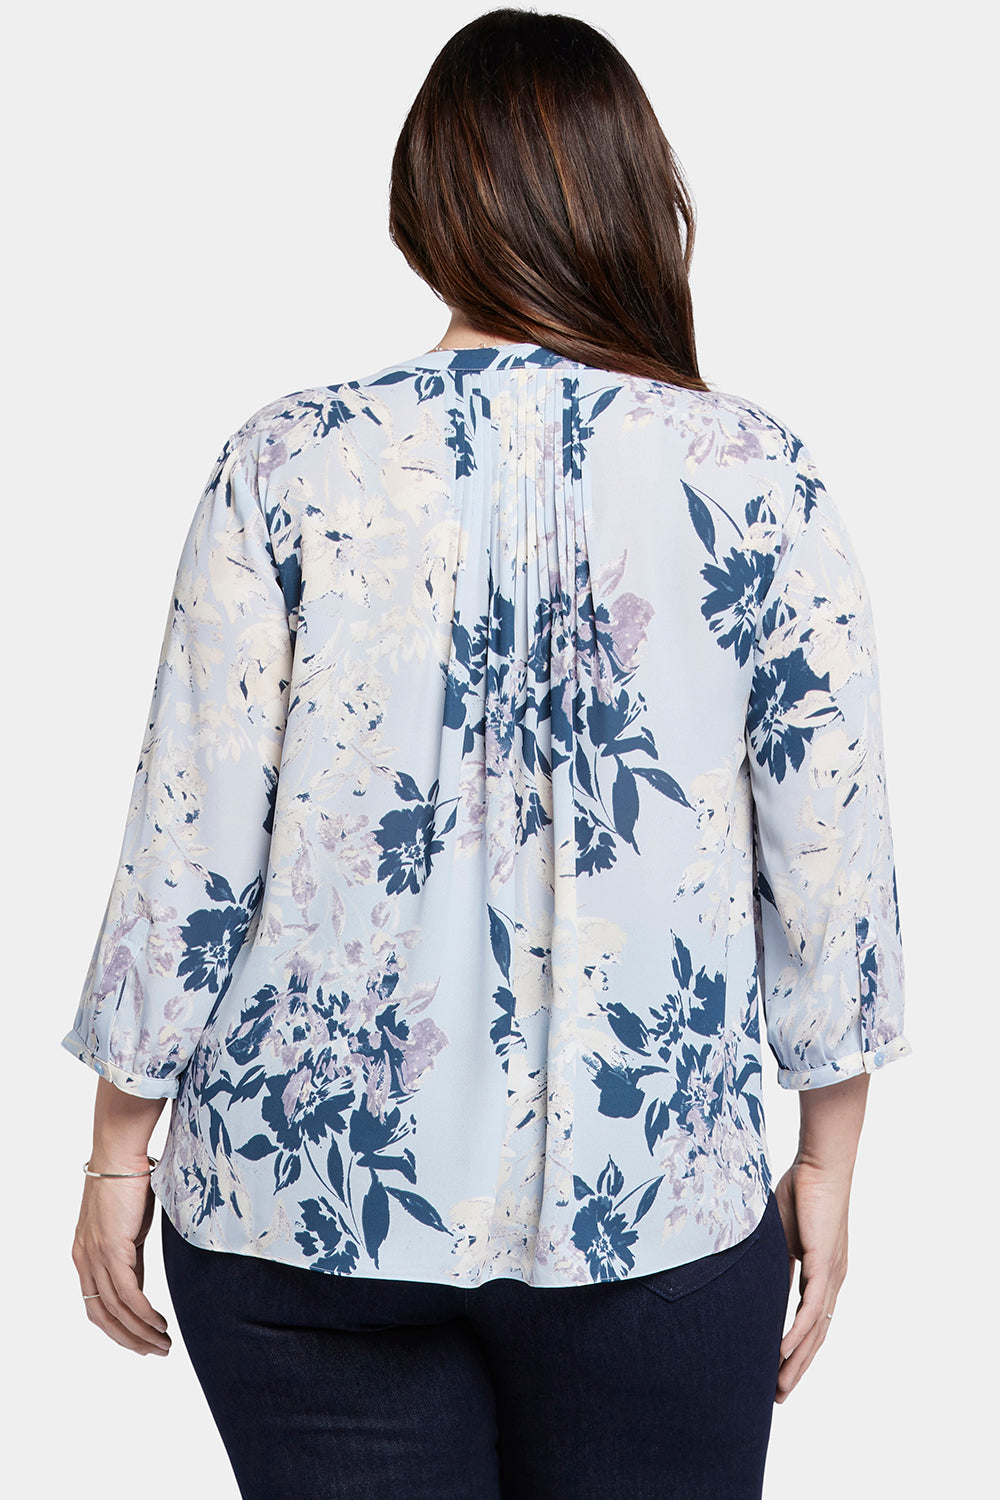 Pintuck Blouse In Plus Size - Valley Faire Blue | NYDJ